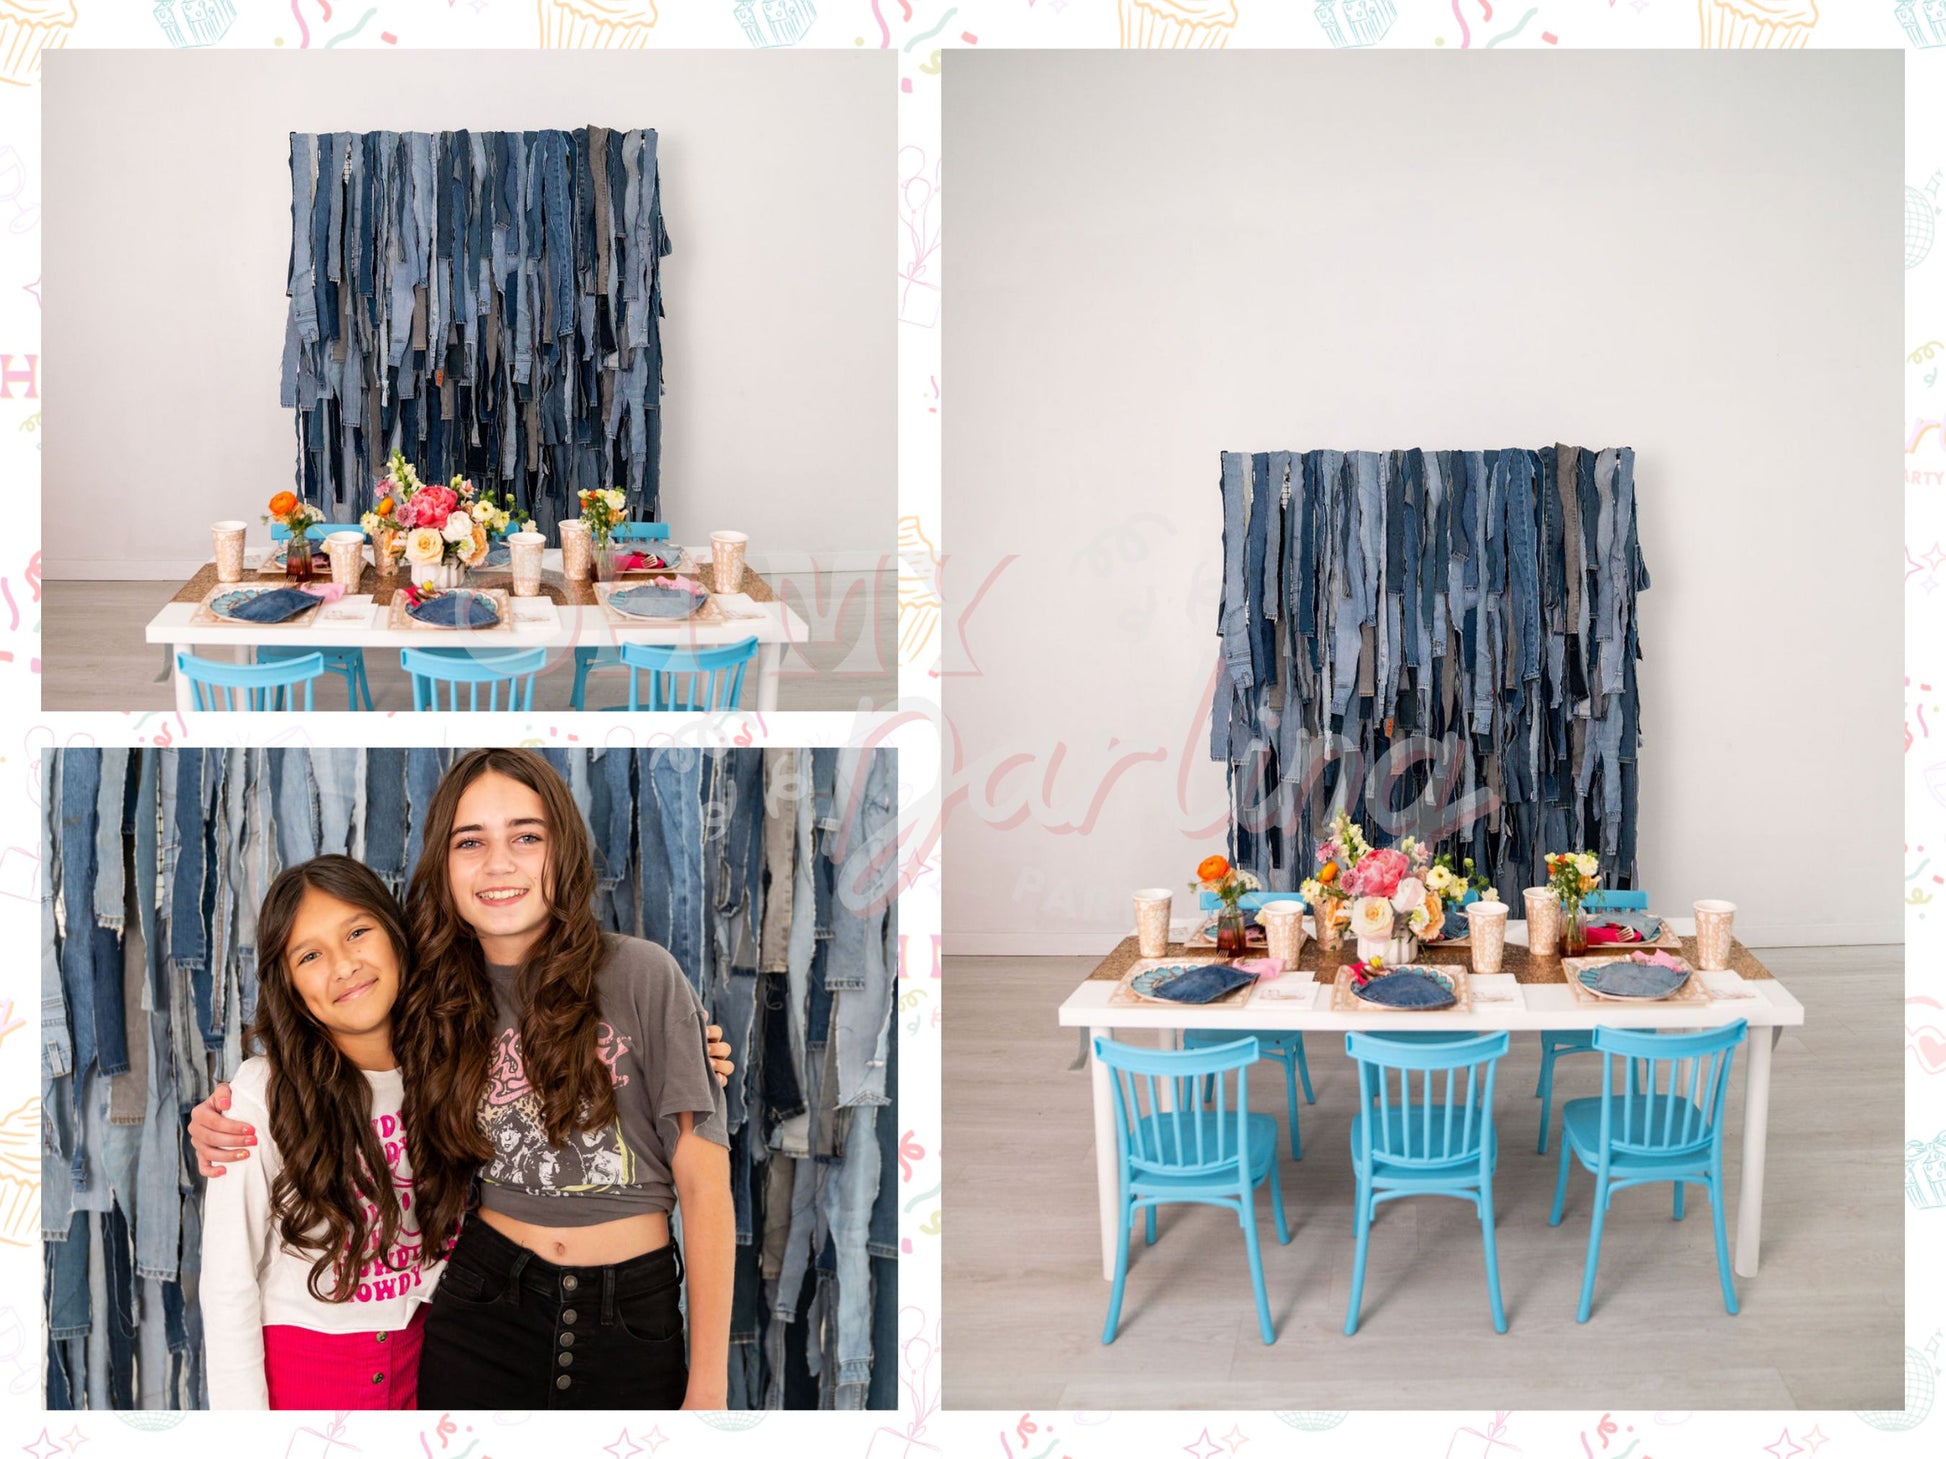 Denim on Denim Fringe Backdrop-Fringe Backdrop-Party Decor-Oh My Darling Party Co-Oh My Darling Party Co-1st rodeo, bachelorette, bachelorette party, backdrops for party, balloon garlands, BLUE BACKDROP, boy birthday, boy party, bull riding, Cowboy, cowboy christmas, Default, denim, farm, farm garland, farm theme, final rodeo, fort worth rodeo, fringe backdrop, fringe garland, Fringe Streamers, girl party, Houston Livestock Show and Rodeo, jeans, last rodeo, light blue, NFR, not my first rodeo, OMDPC, on th